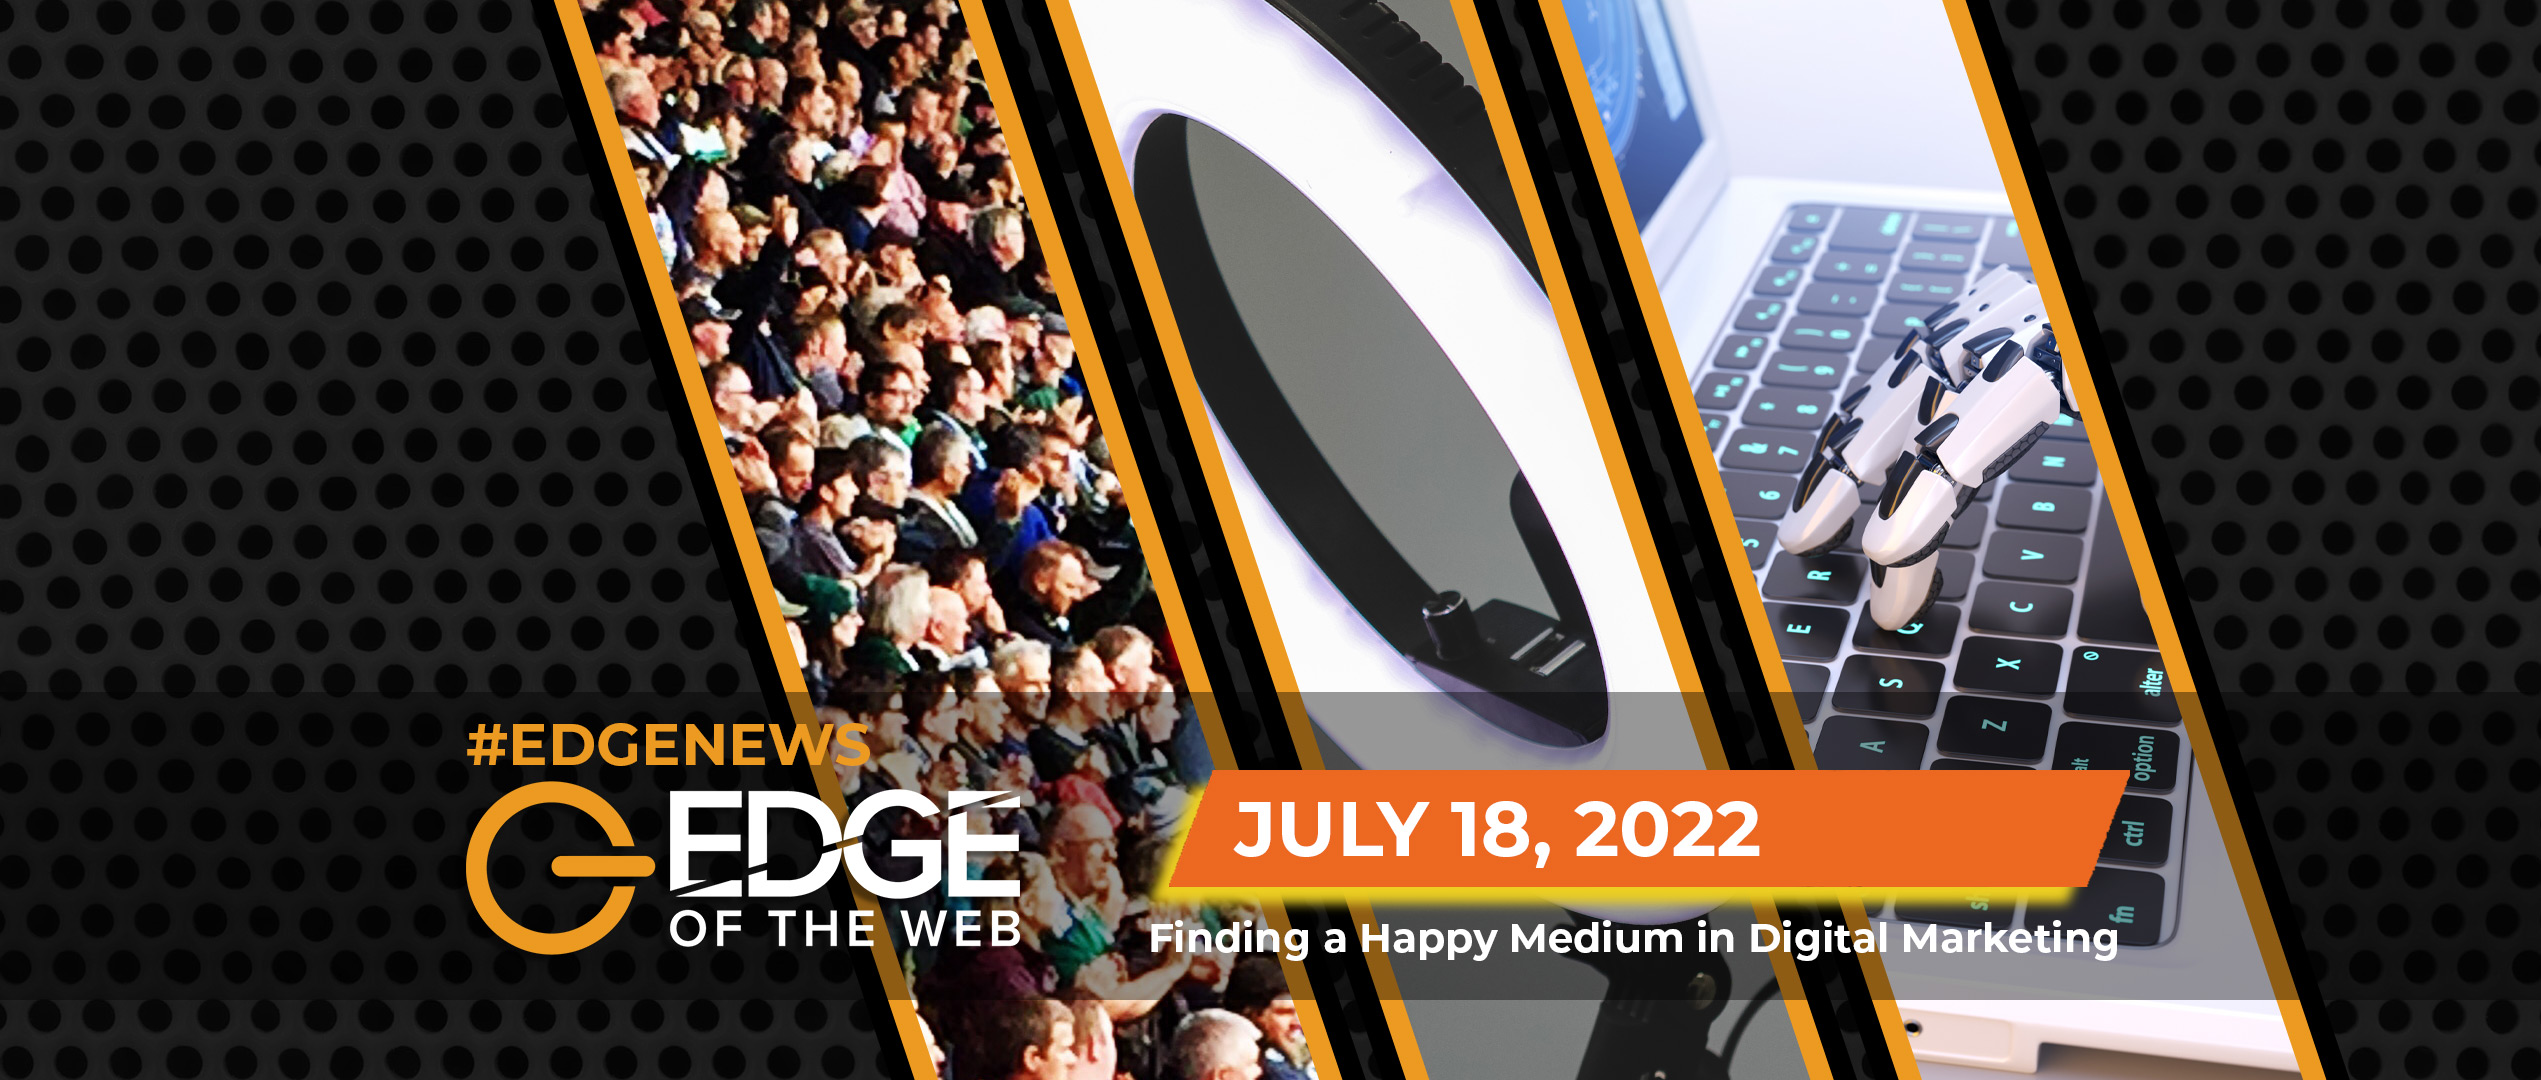 516 | News from the EDGE | Week of 07.18.2022